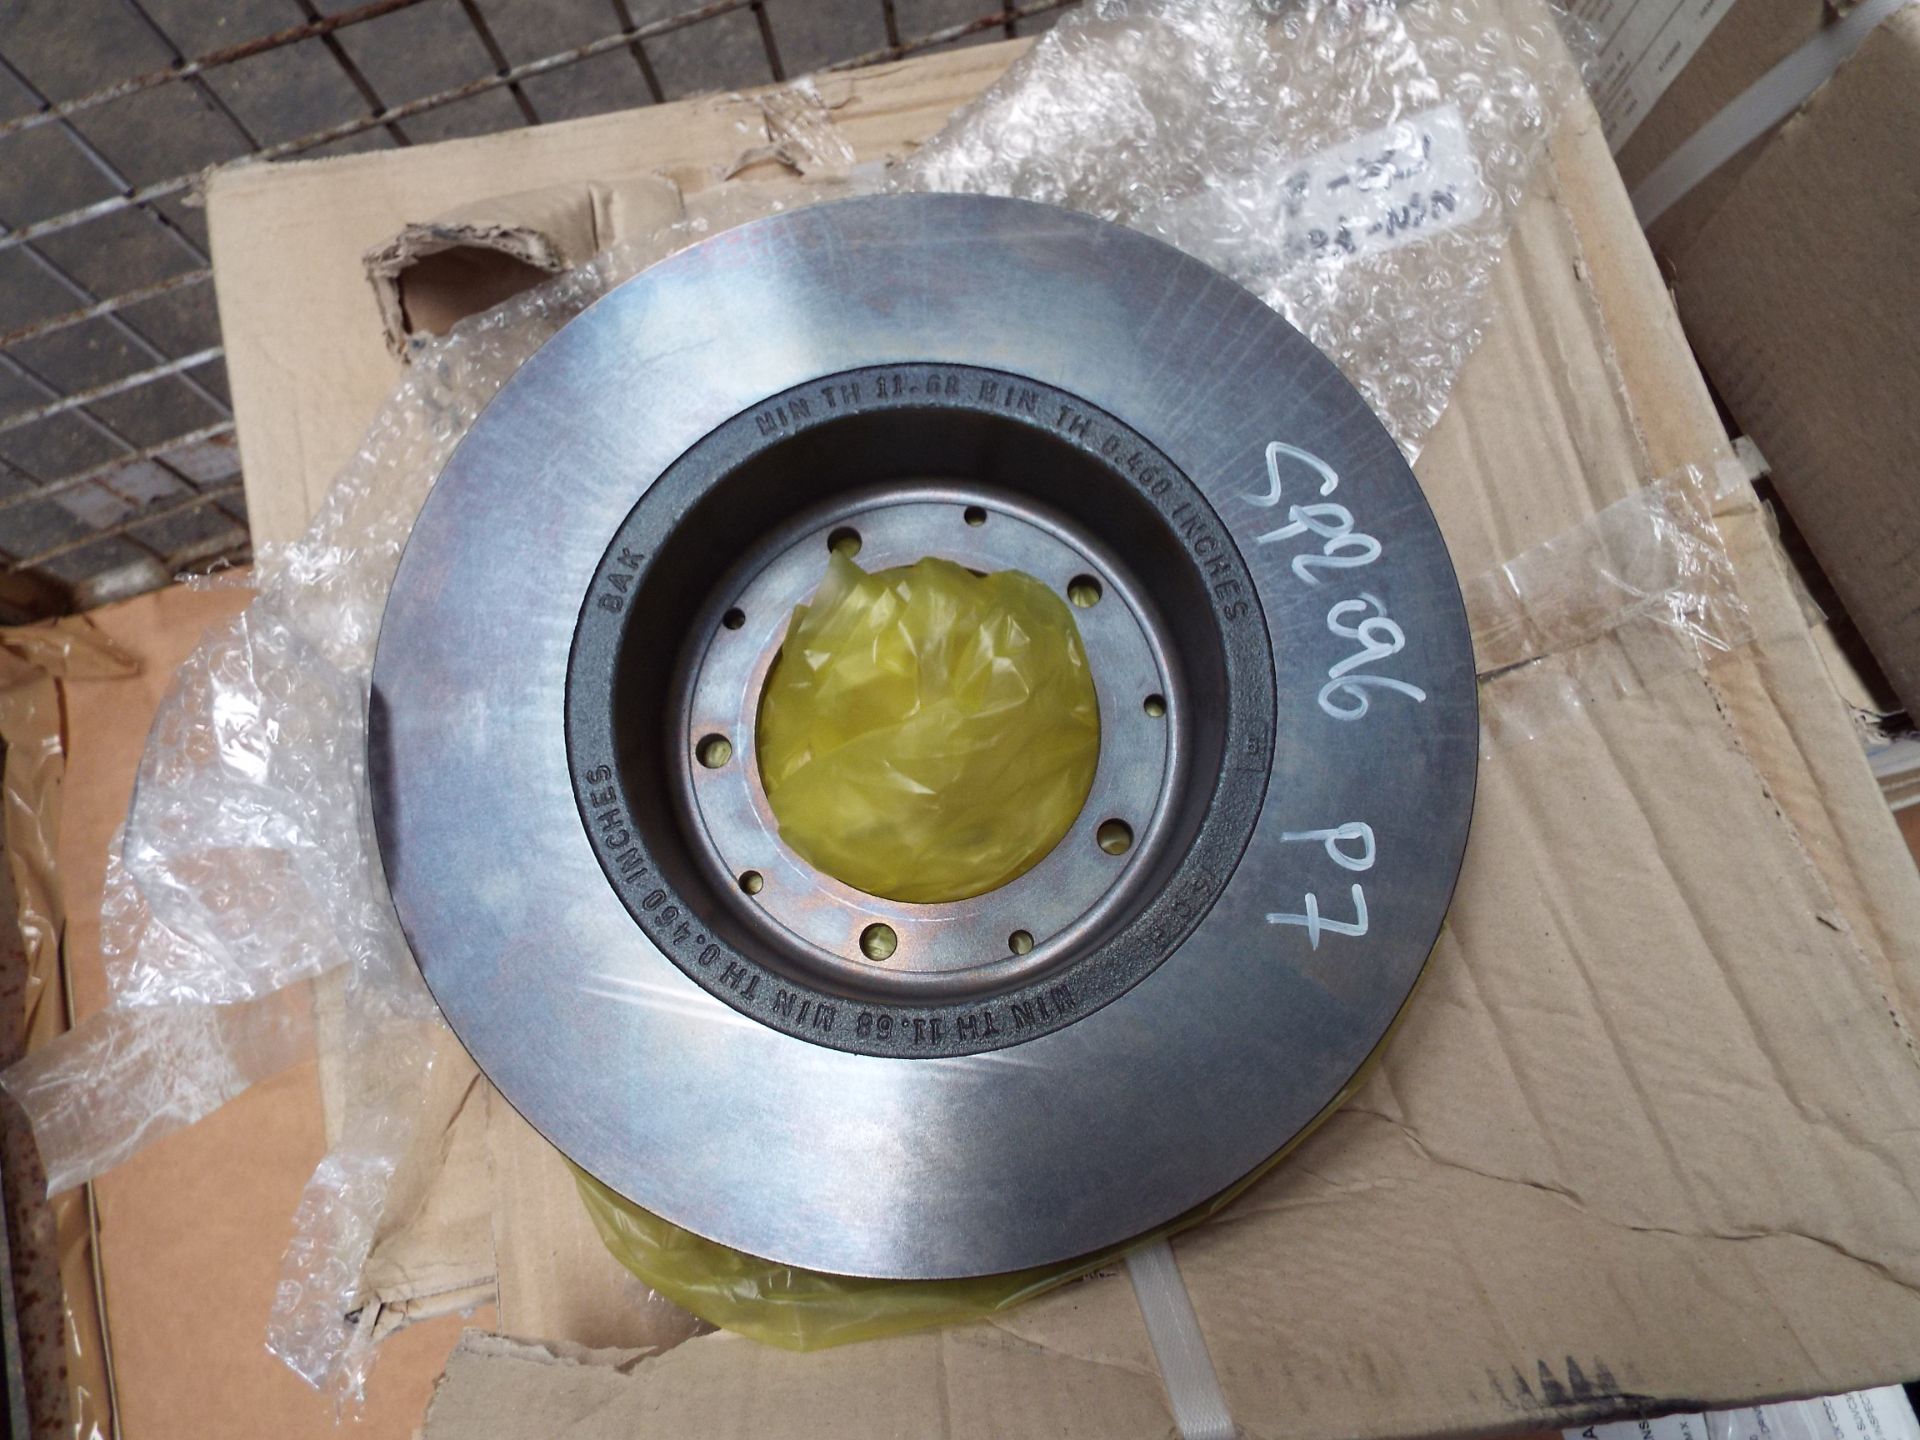 Mixed Stillage of Land Rover Parts inc Brake Discs, Prop Shafts and Wheel Rim - Image 2 of 7